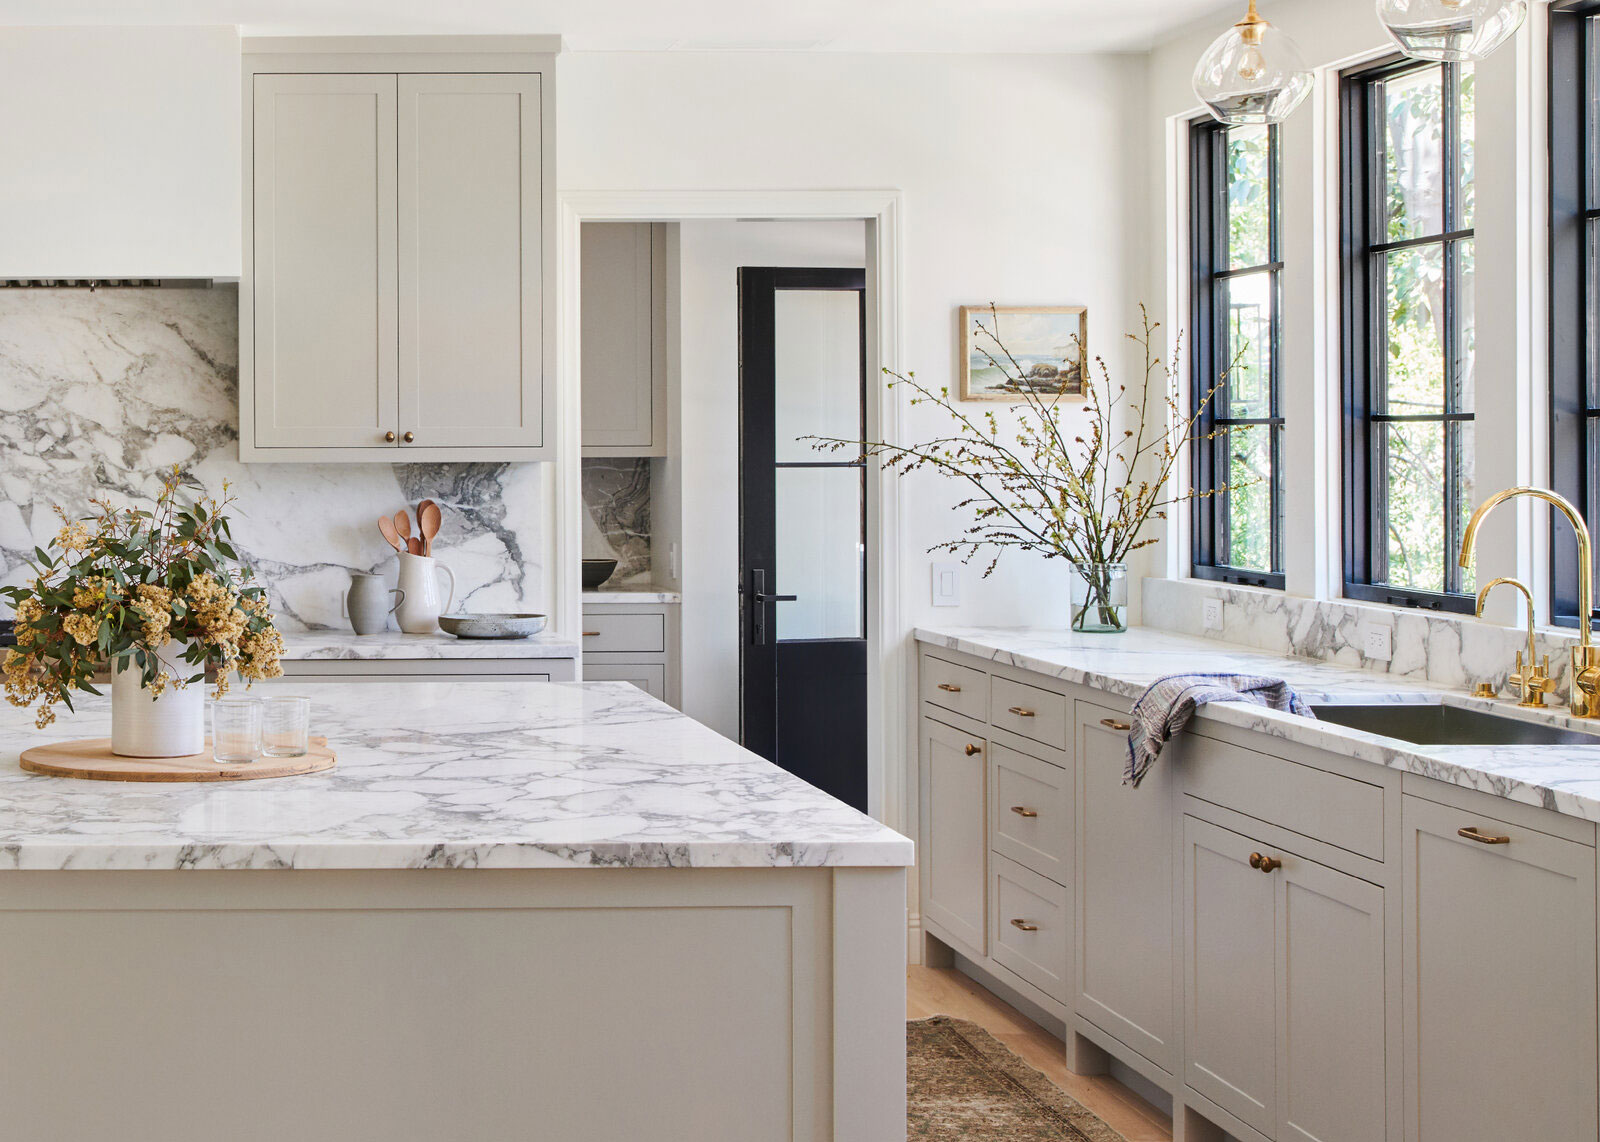 Kitchen styles The ultimate guide, from Shaker to slab   Homes ...